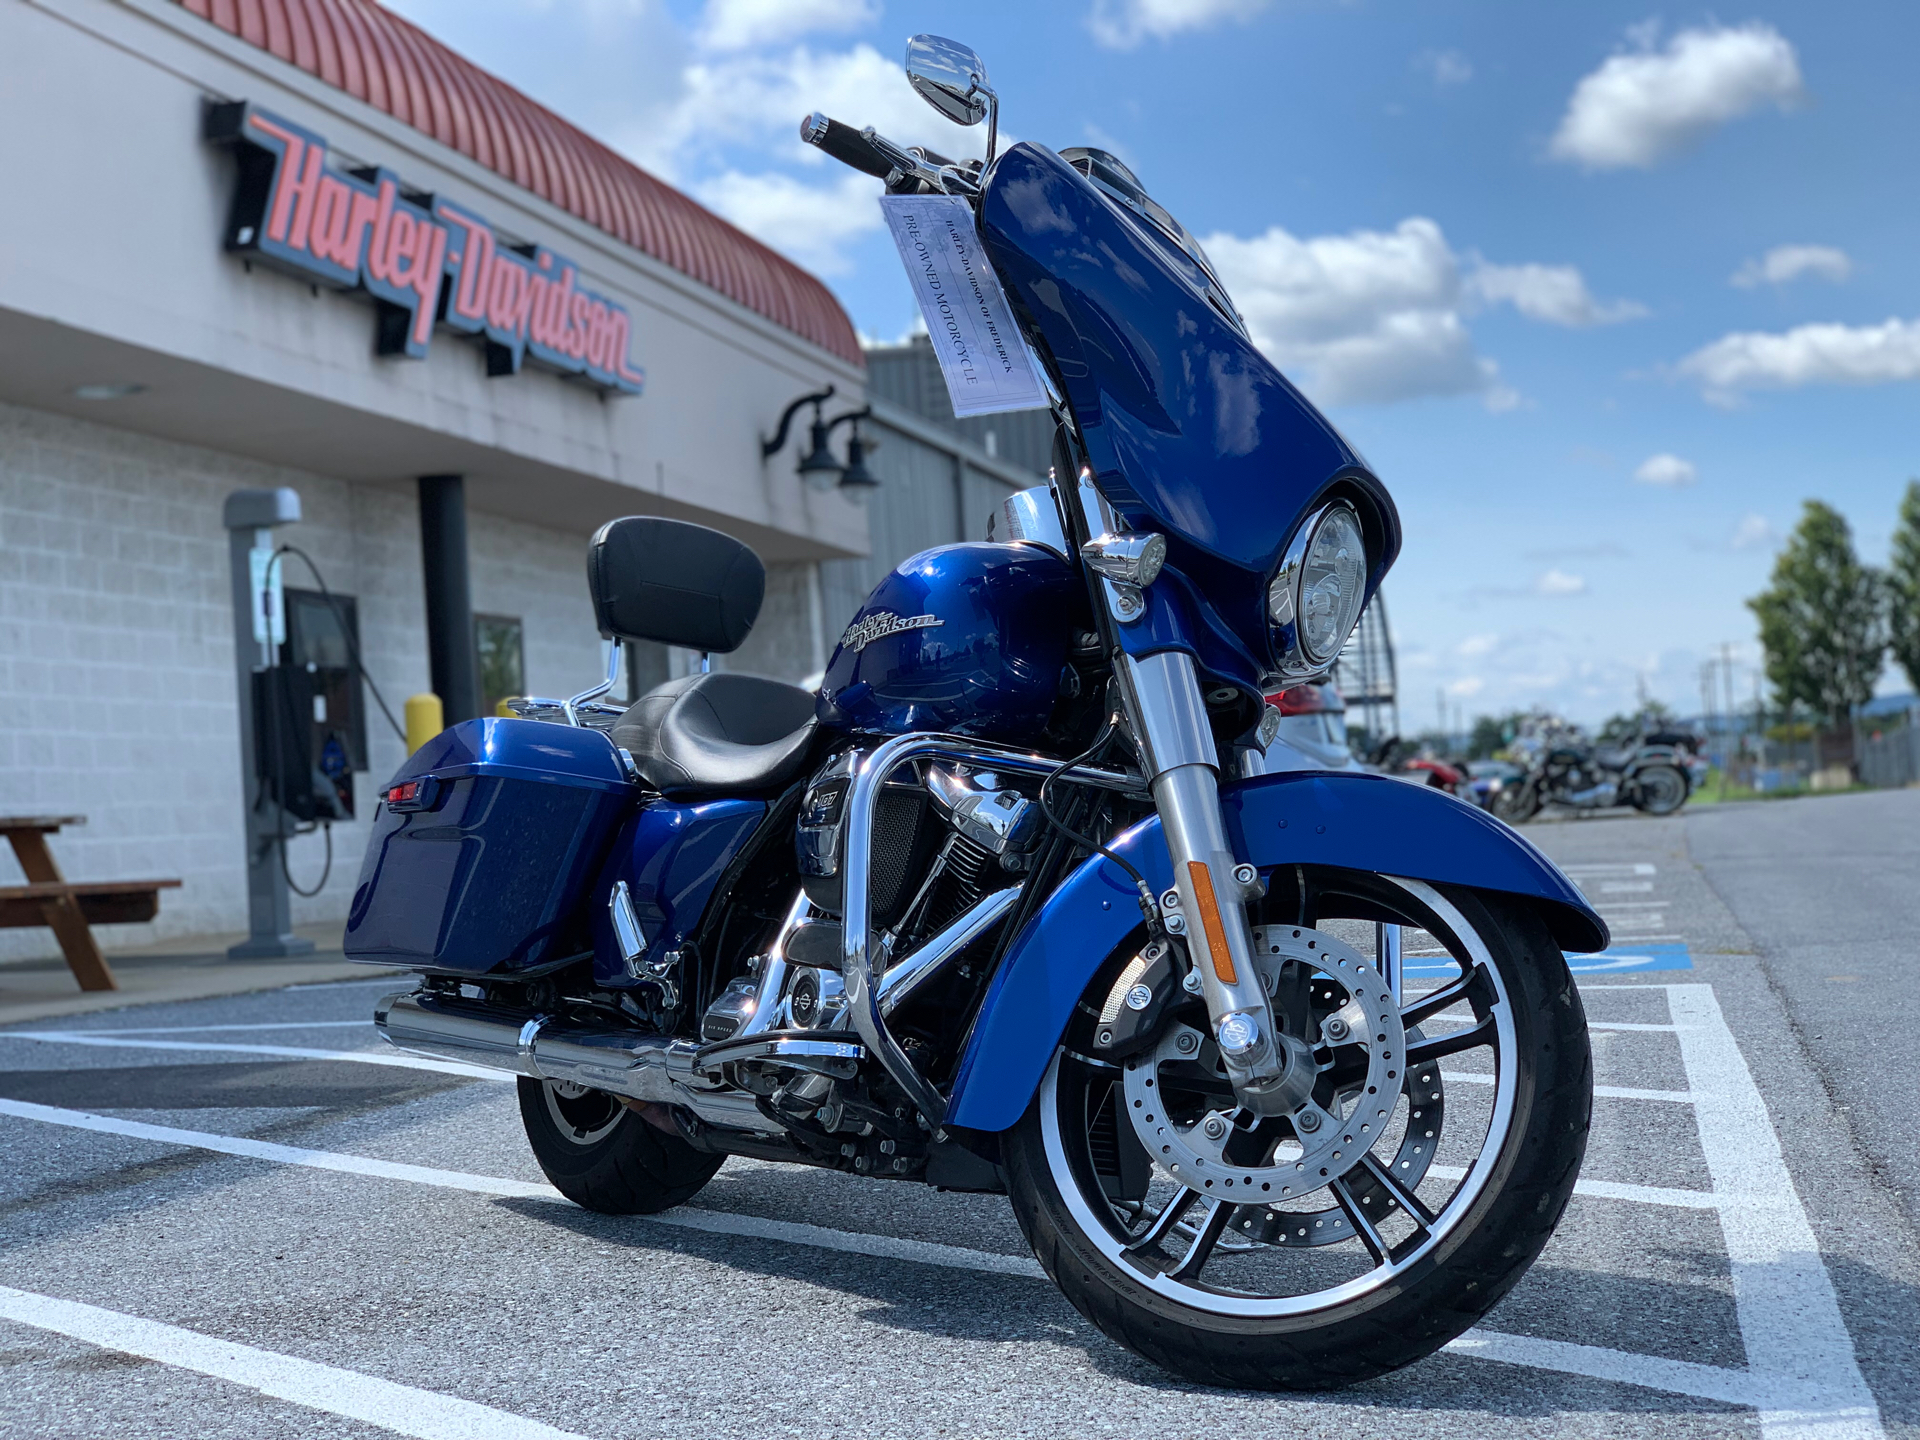 Used 2017 Harley Davidson Street Glide Special Motorcycles In Frederick Md Superior Blue 627823